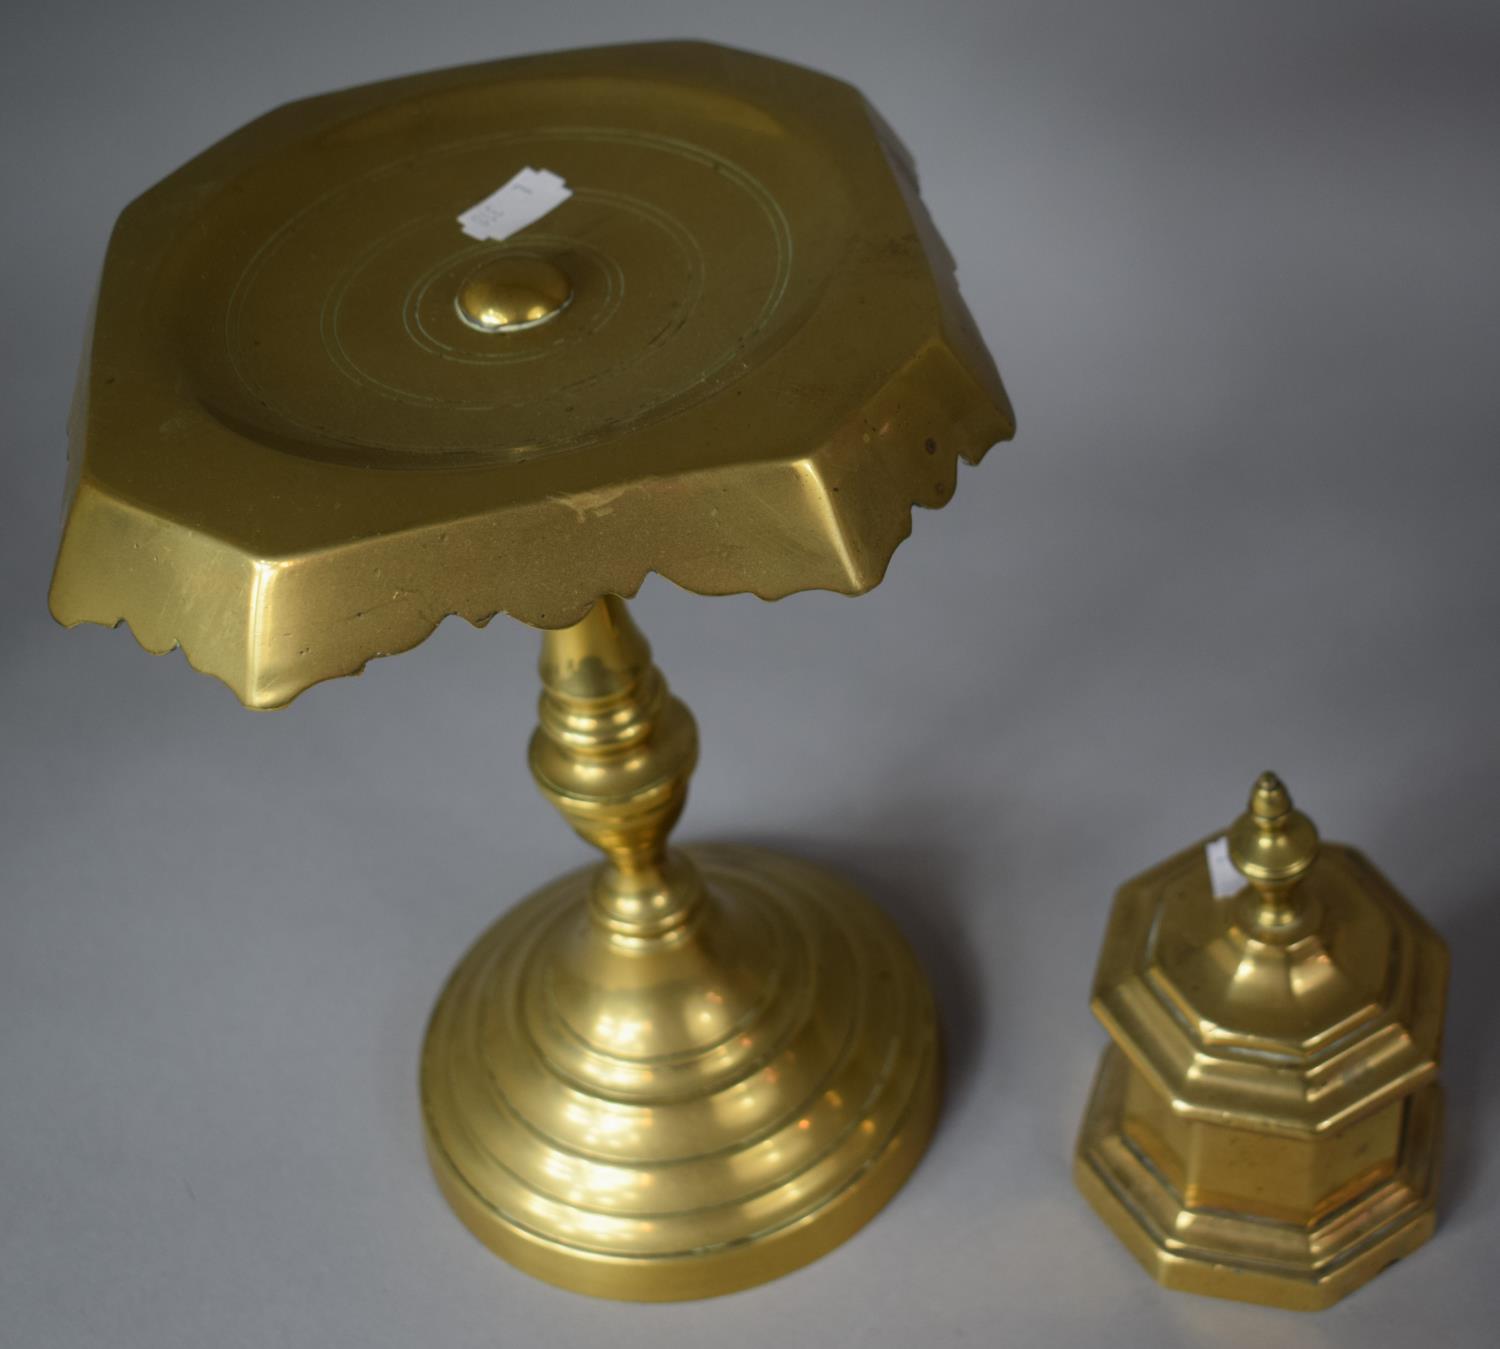 A Late 19th Century Brass Trivet Stand together with a Lidded Brass Box with Vase Finial - Image 2 of 2